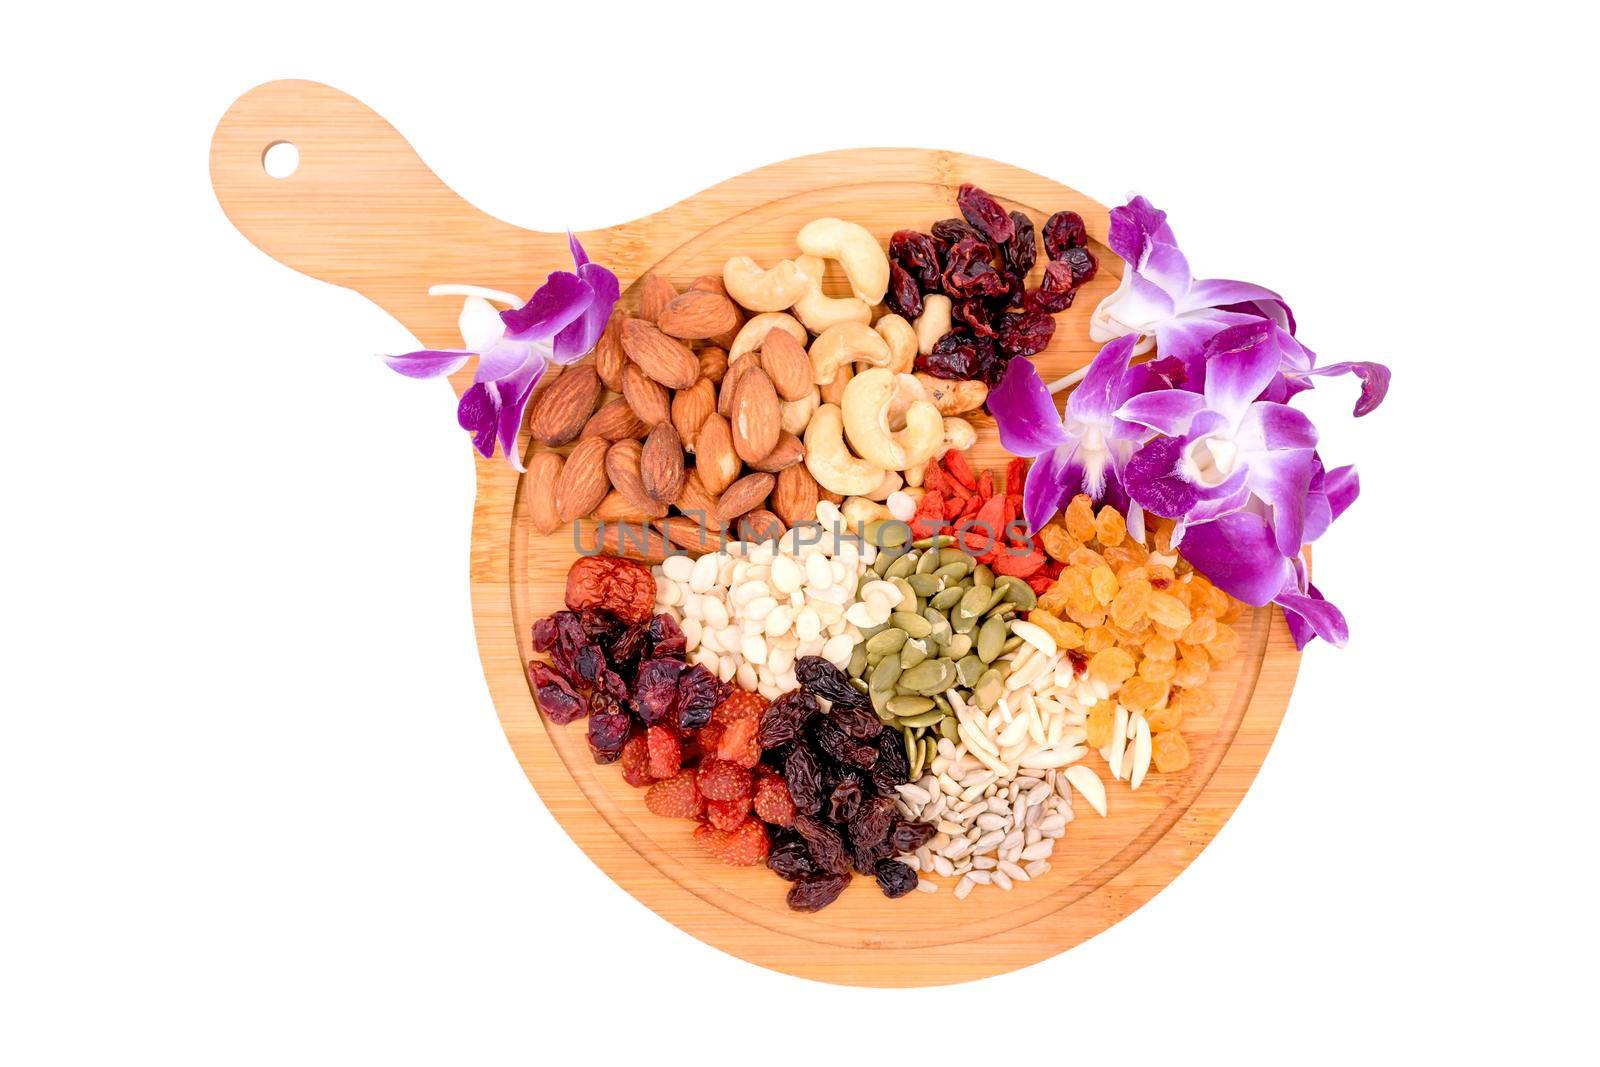 Top view group of whole grains and dried fruit with beautiful orc hid on a wooden plate isolated on white background.